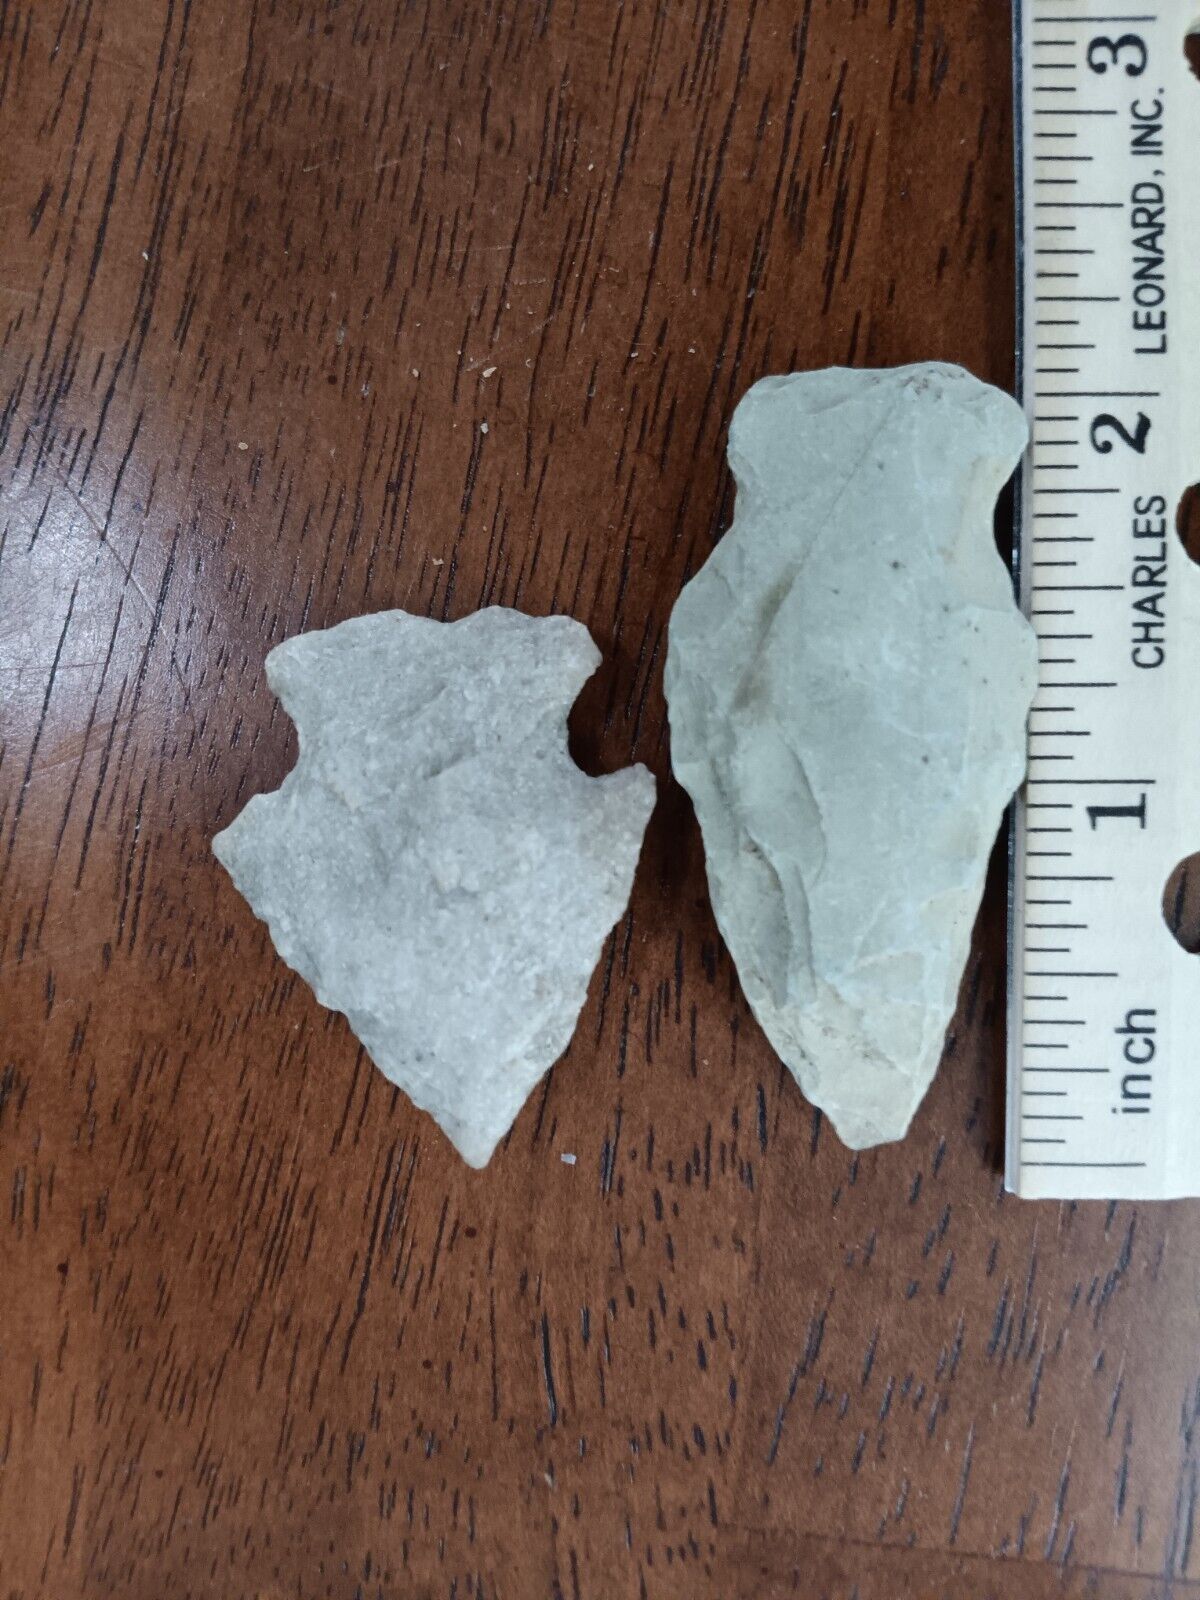 TWO AUTHENTIC NATIVE AMERICAN INDIAN ARTIFACTS FOUND EASTERN N.C.--- DDD/38